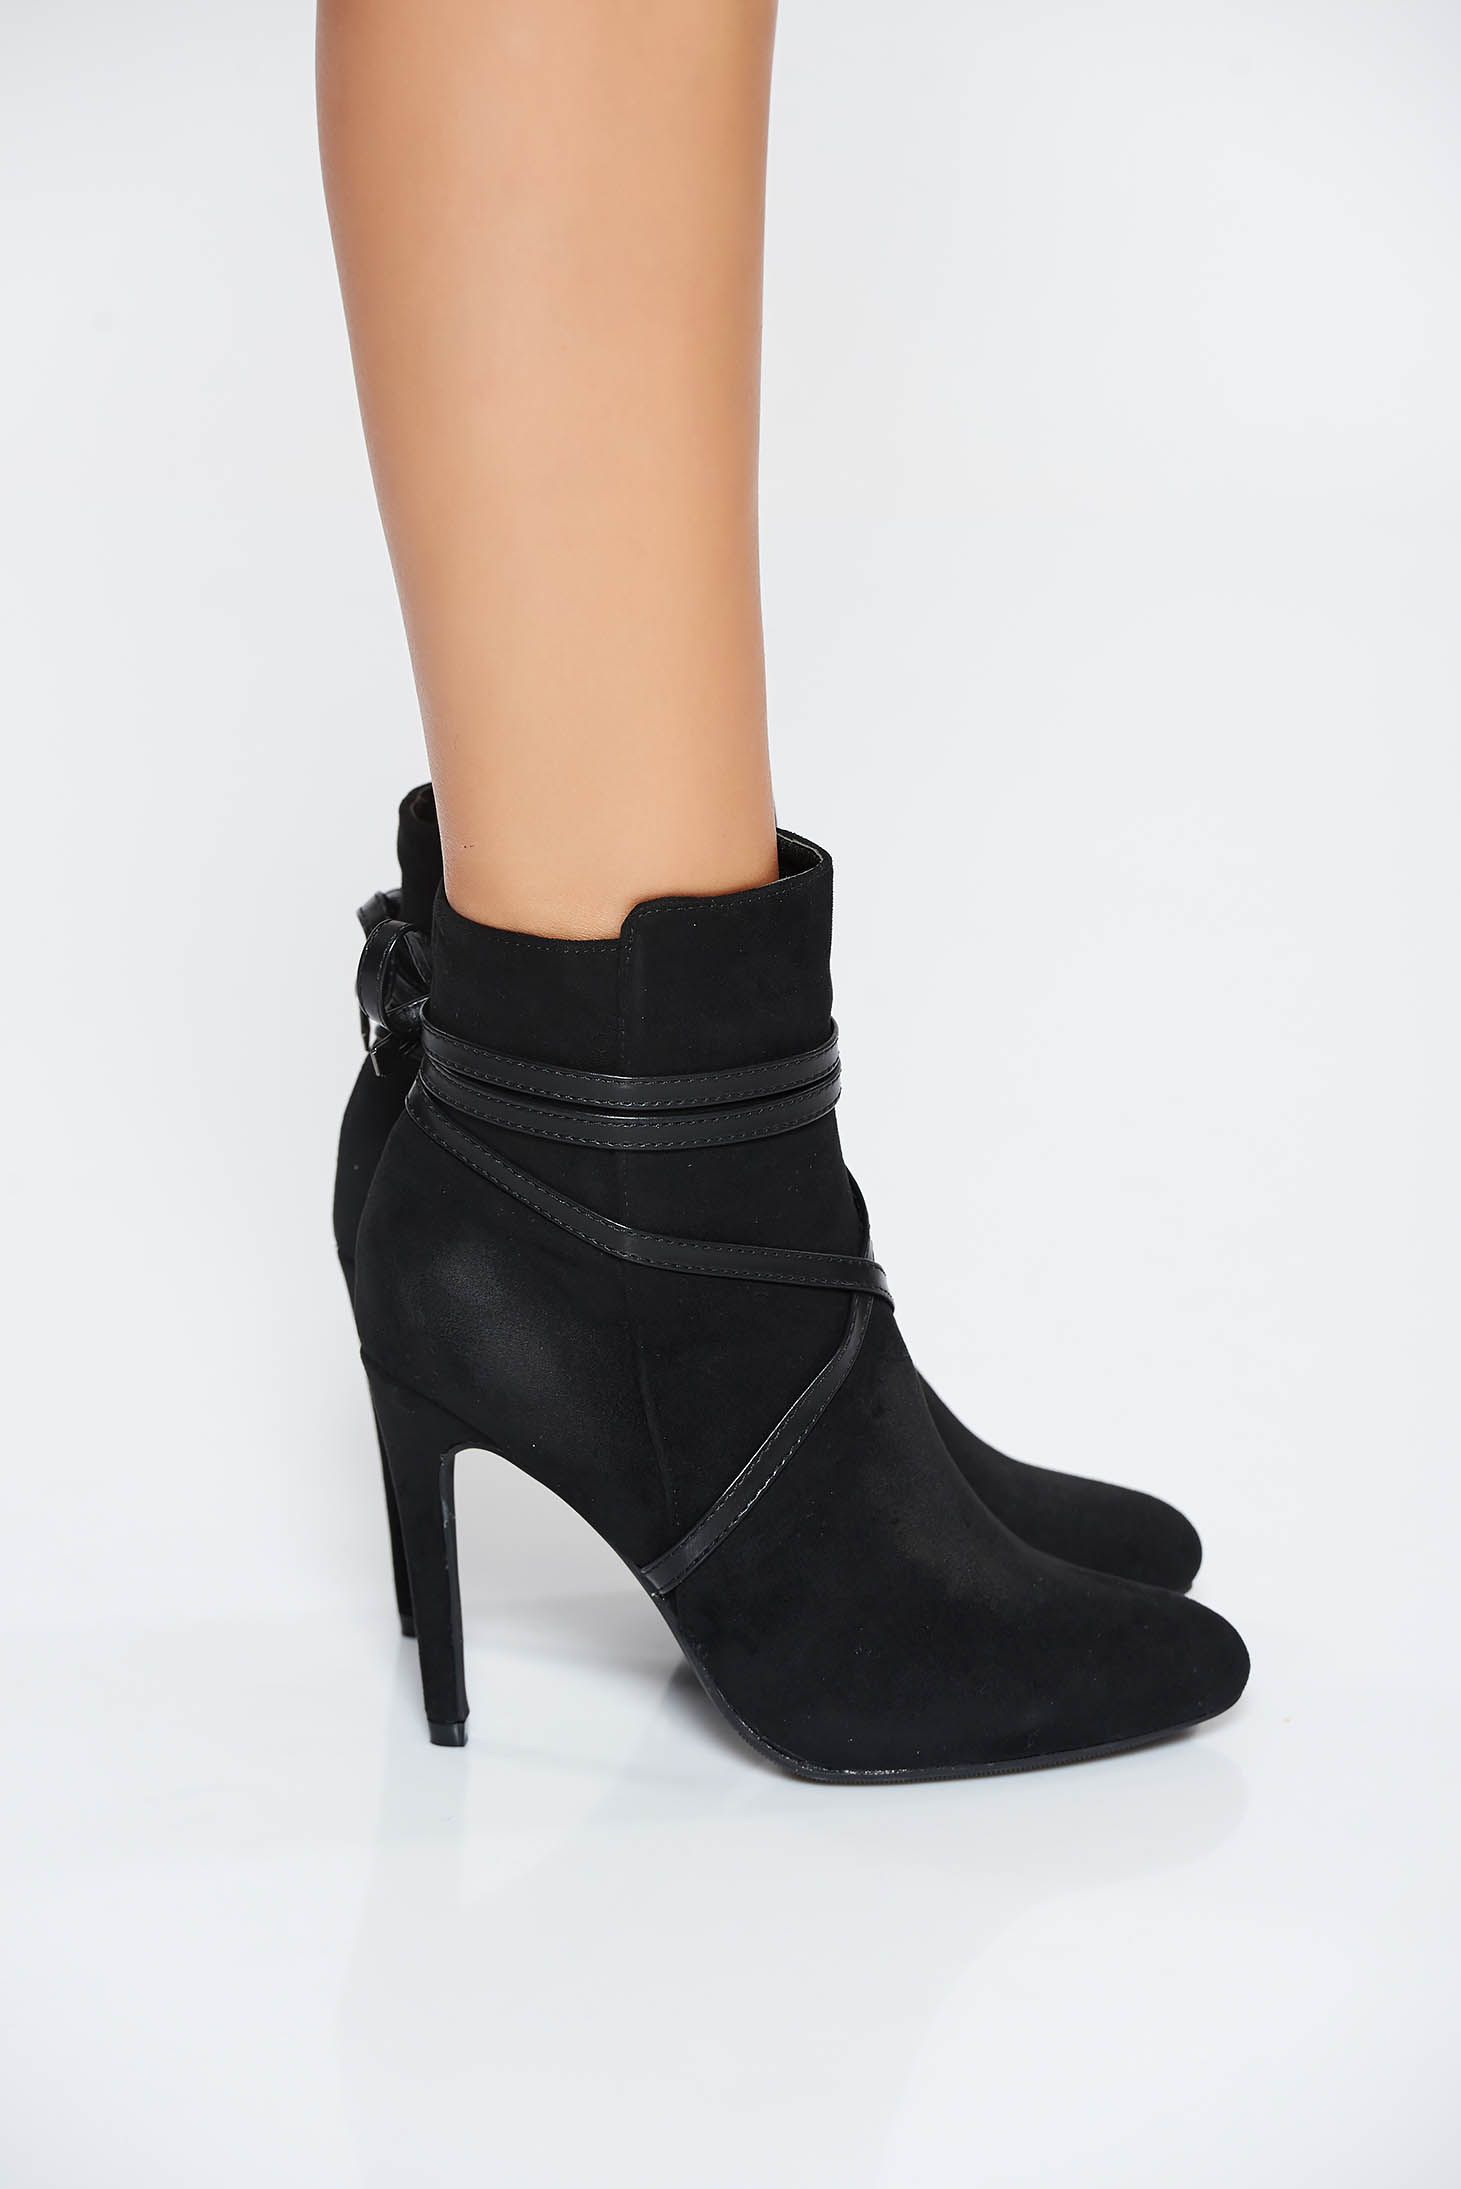 Black casual ankle boots from velvet fabric with laced details